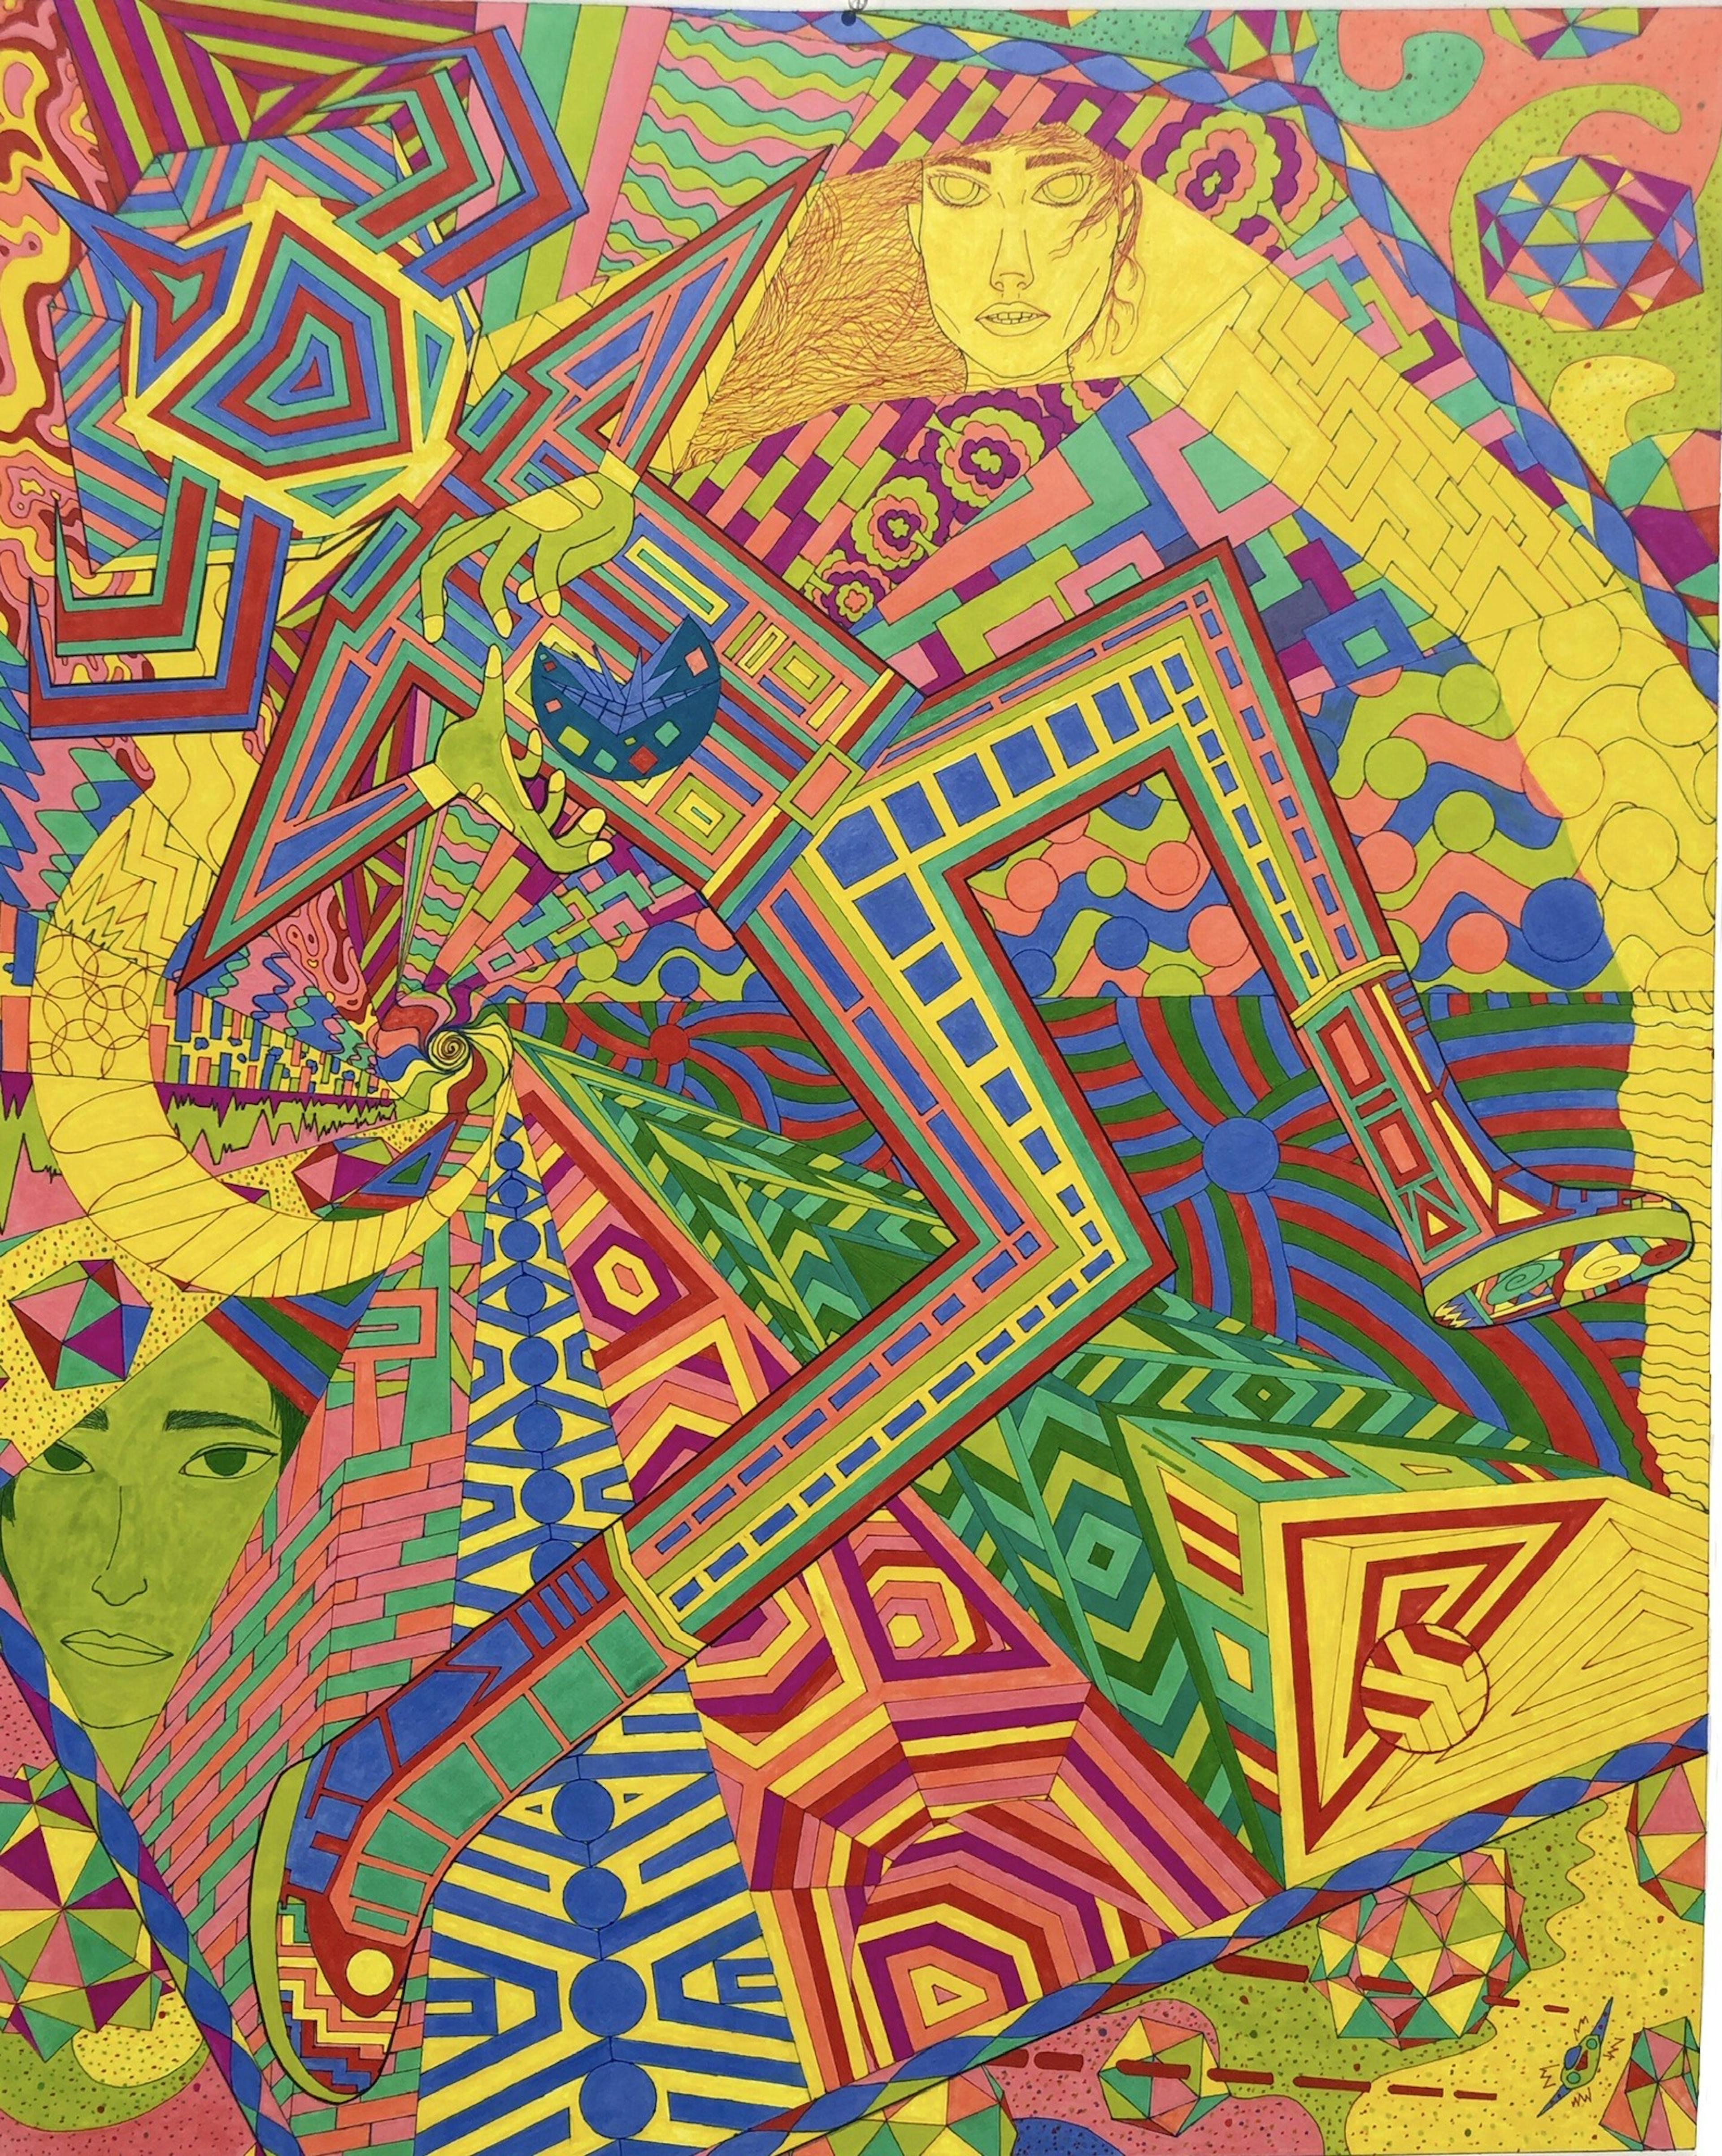 coloured pencil drawing by Mide Kadiri. Most prominent colours are yellow, green and blue. Geometric shapes create an illusion of a mosaic. There is a figure within, mid-leap, and holding a sphere in their hands. A femnine face is in the corner, and the rest is a mix of geometric shapes and stripes of vibrant colour